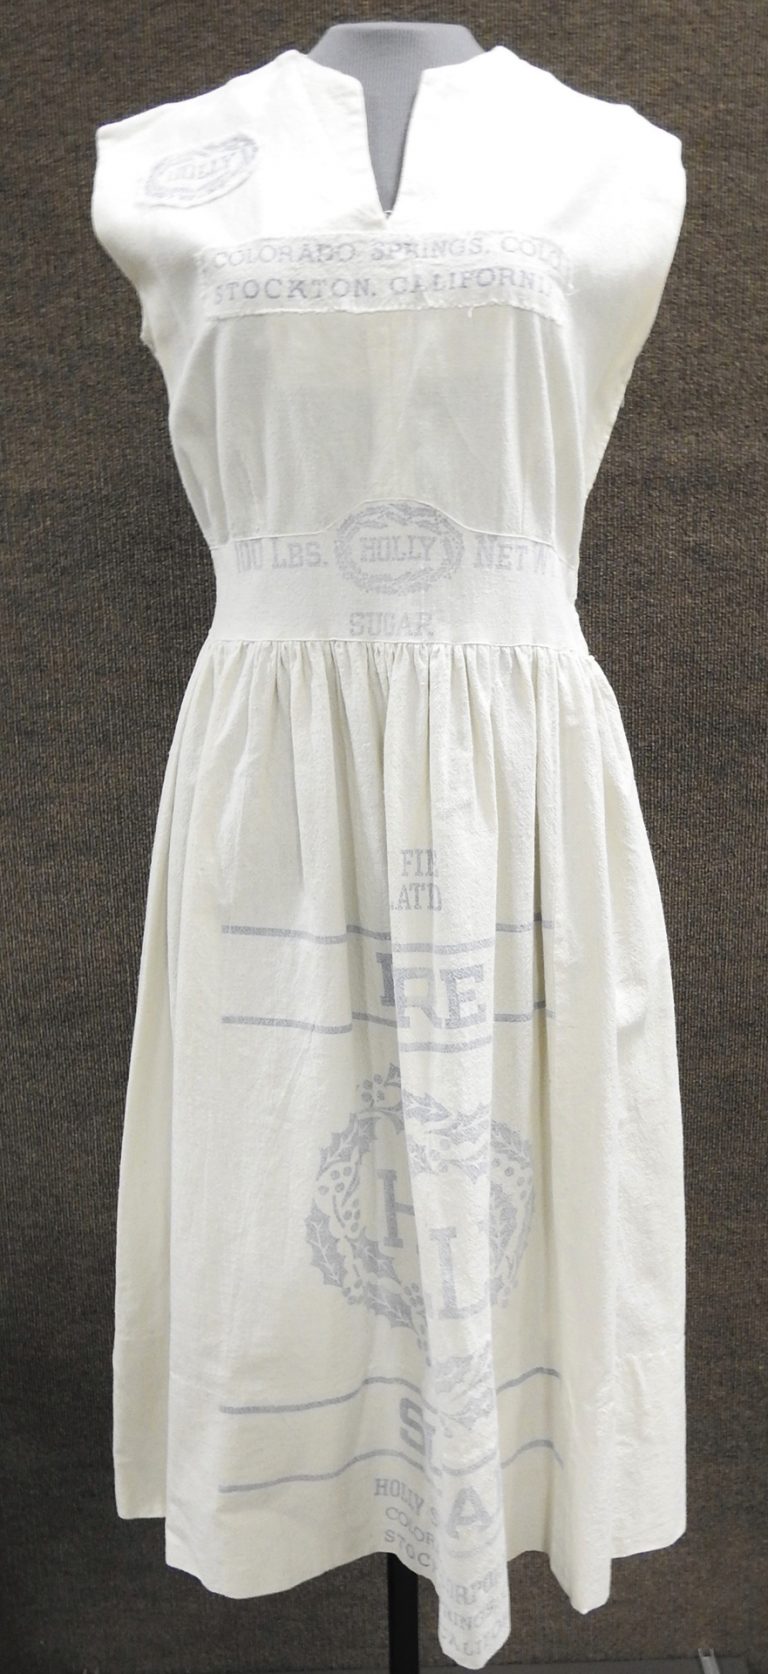 Dress Made from Holly Sugar Sacks, ca. 1945. Generously donated by Dr. Patrick M. Casey, 78-112-3.